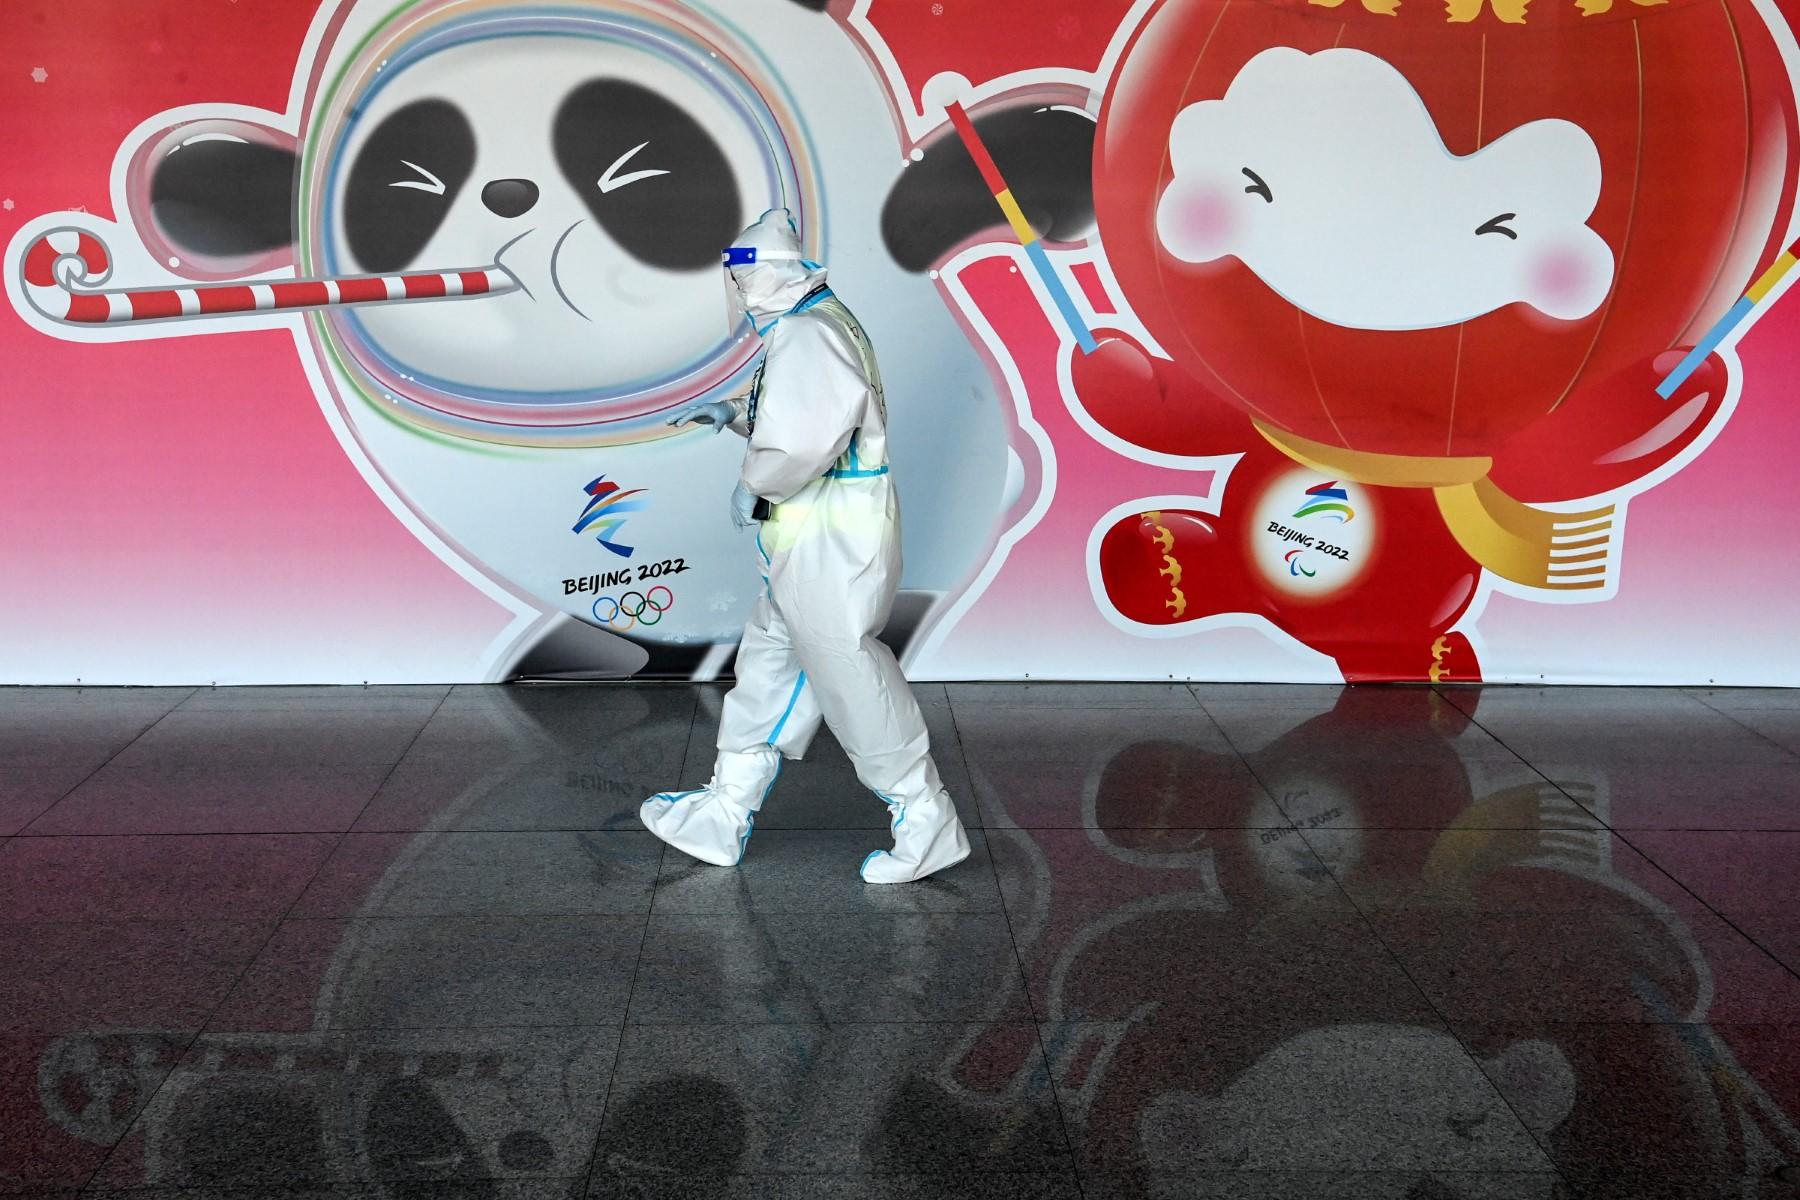 An employee wearing a hazmat suit walks past an Olympic mascot banner at the Beijing Capital International Airport ahead of the 2022 Winter Olympics in Beijing on Jan 27. Photo: AFP